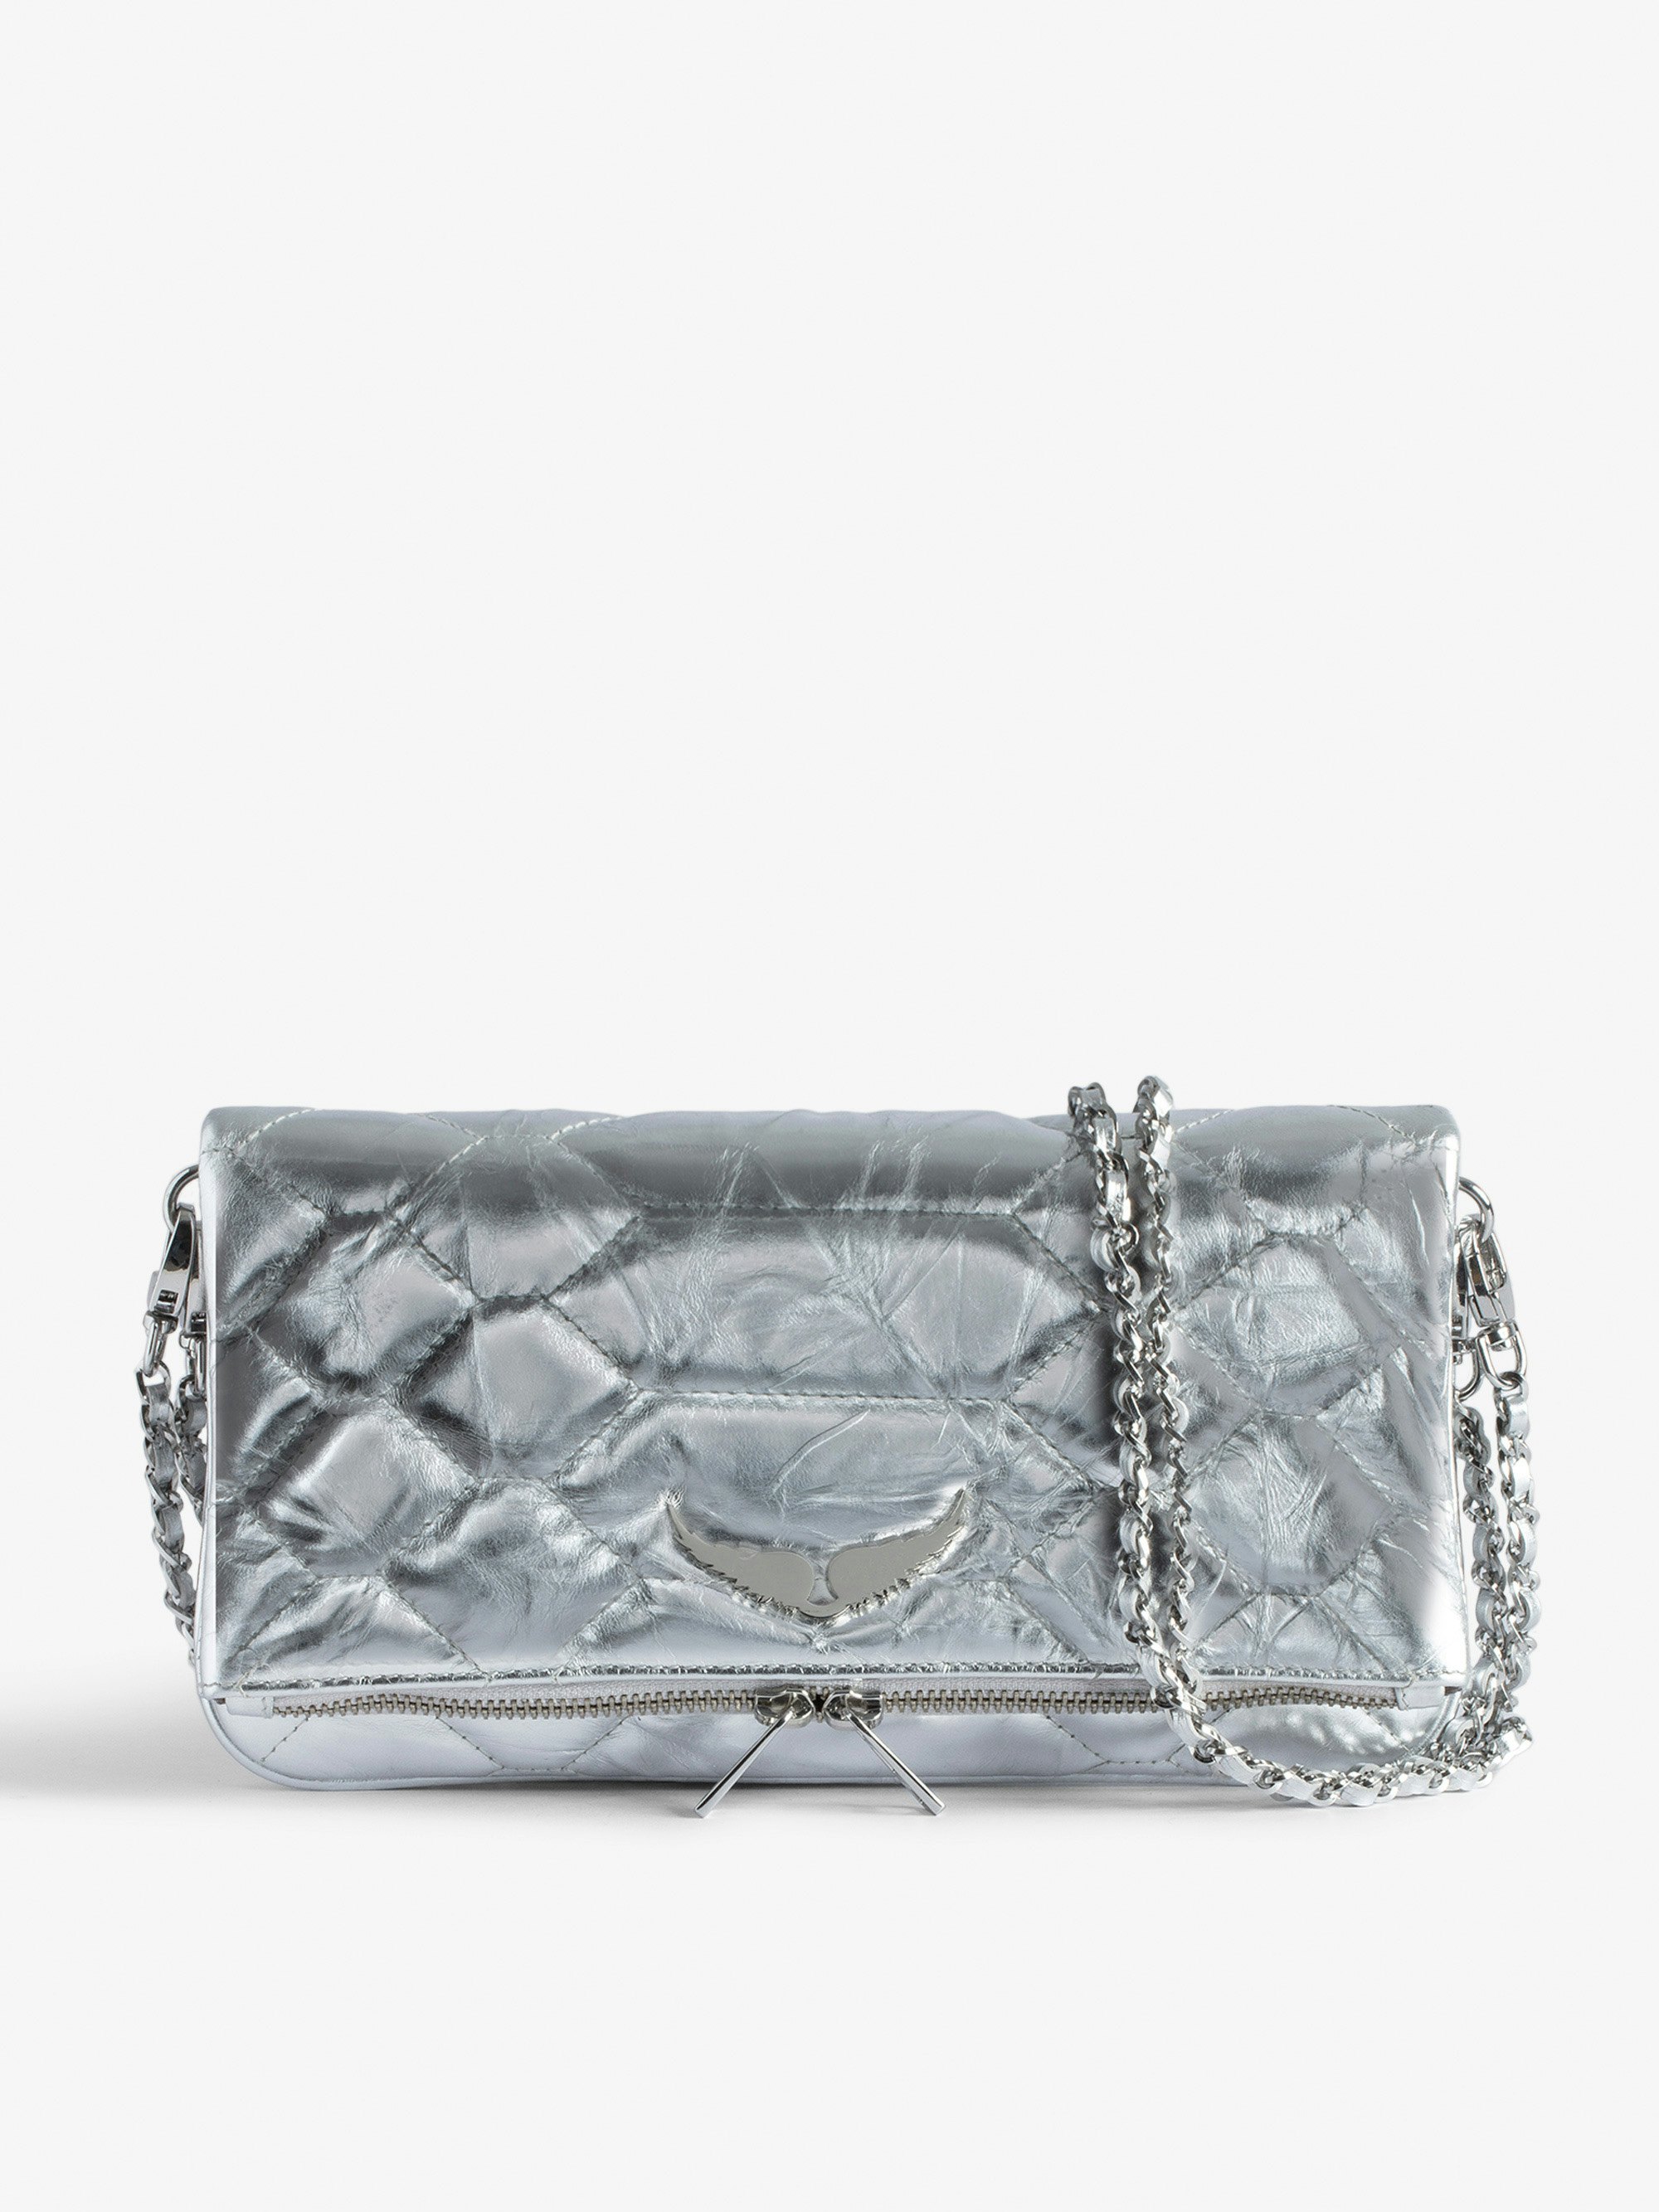 Rock Quilted Metallic Clutch - Rock silver crinkled quilted leather clutch with double leather and metal chain.